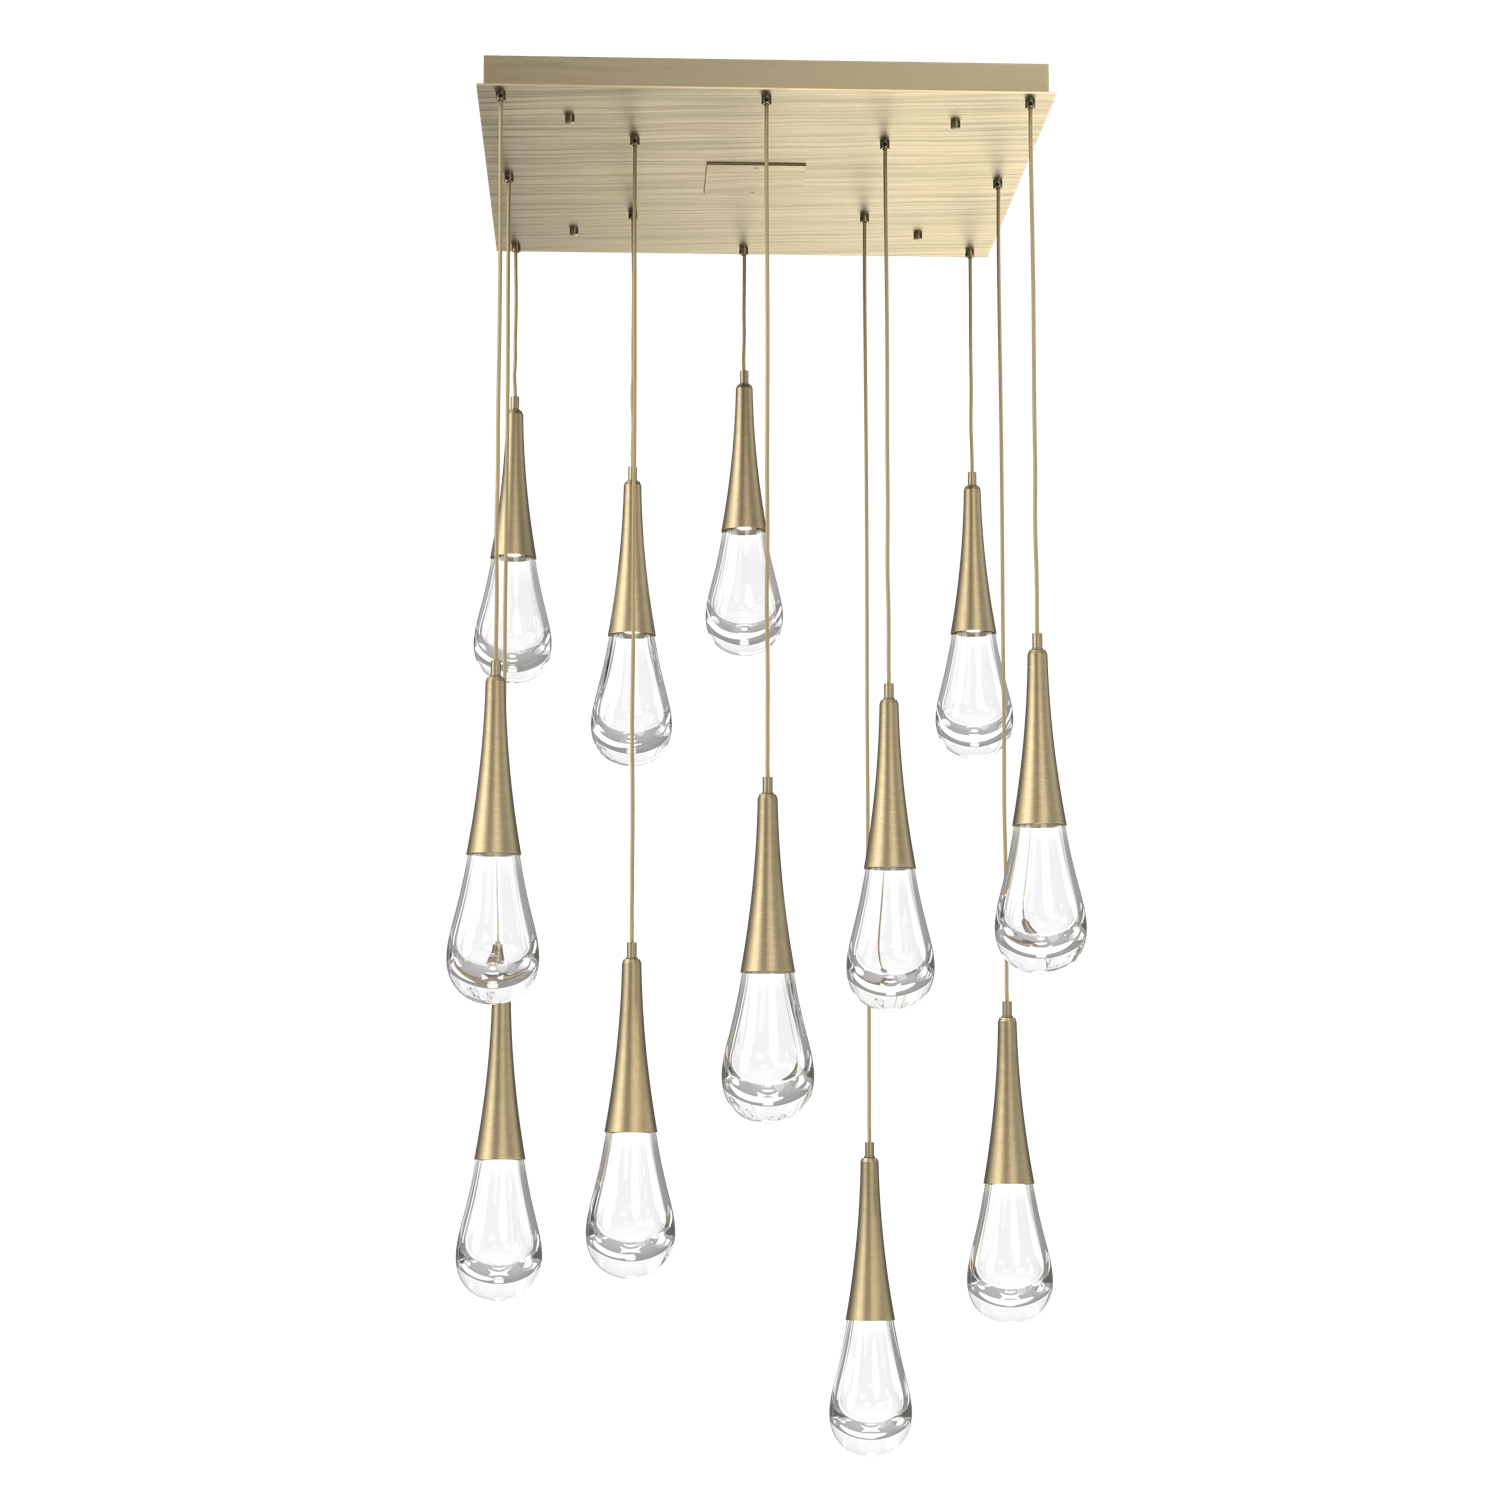 CHB0078-12-HB-Hammerton-Studio-Raindrop-12-light-square-pendant-chandelier-with-heritage-brass-finish-and-clear-blown-glass-shades-and-LED-lamping